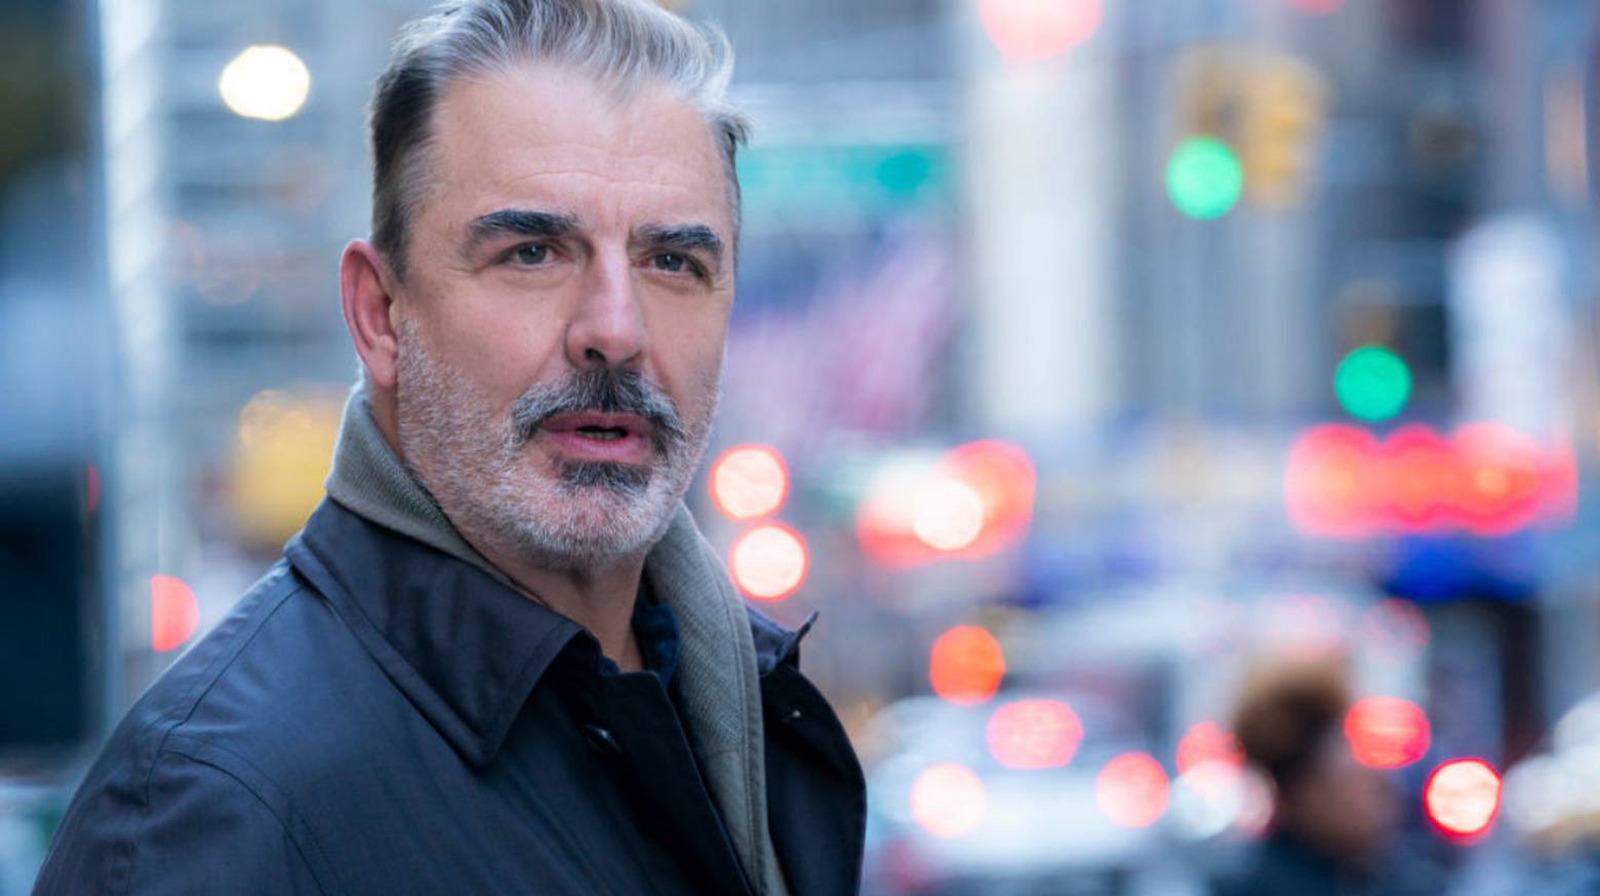 Chris Noth Dropped From The Equalizer Following Sexual Assault Allegations 0709